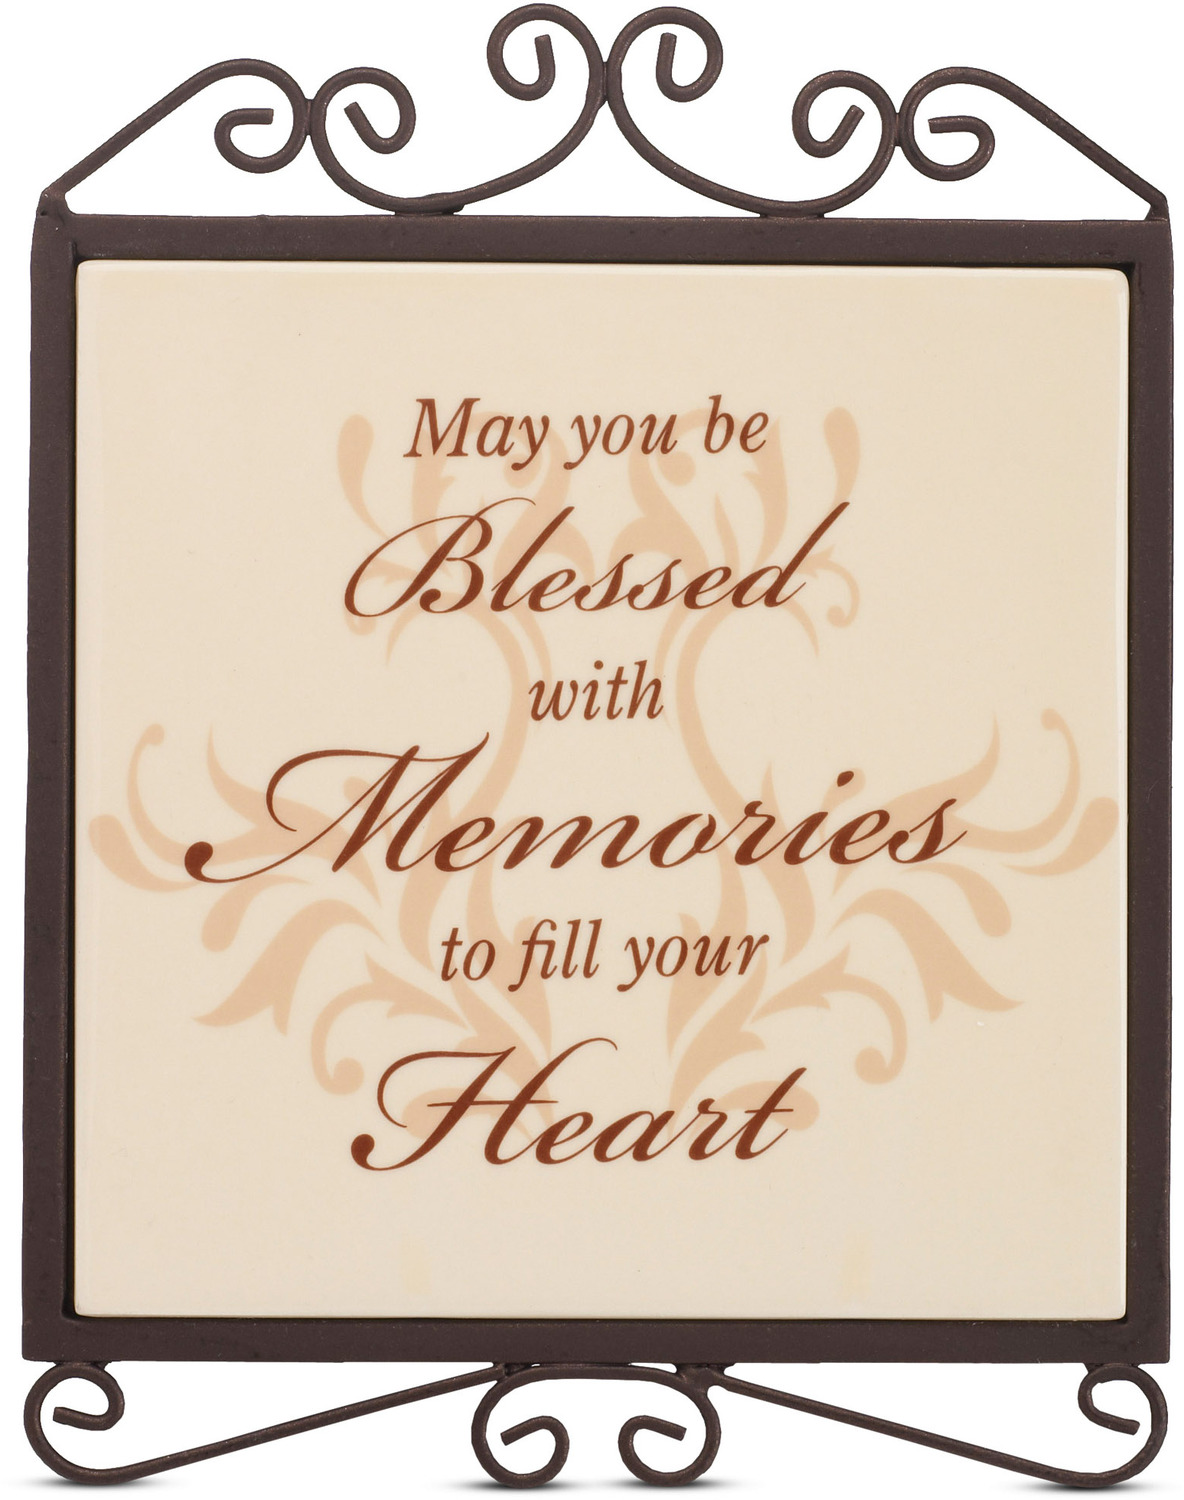 Blessed with Memories by Simply Stated - Blessed with Memories - 5" x 6.5" Plaque with Metal Scroll